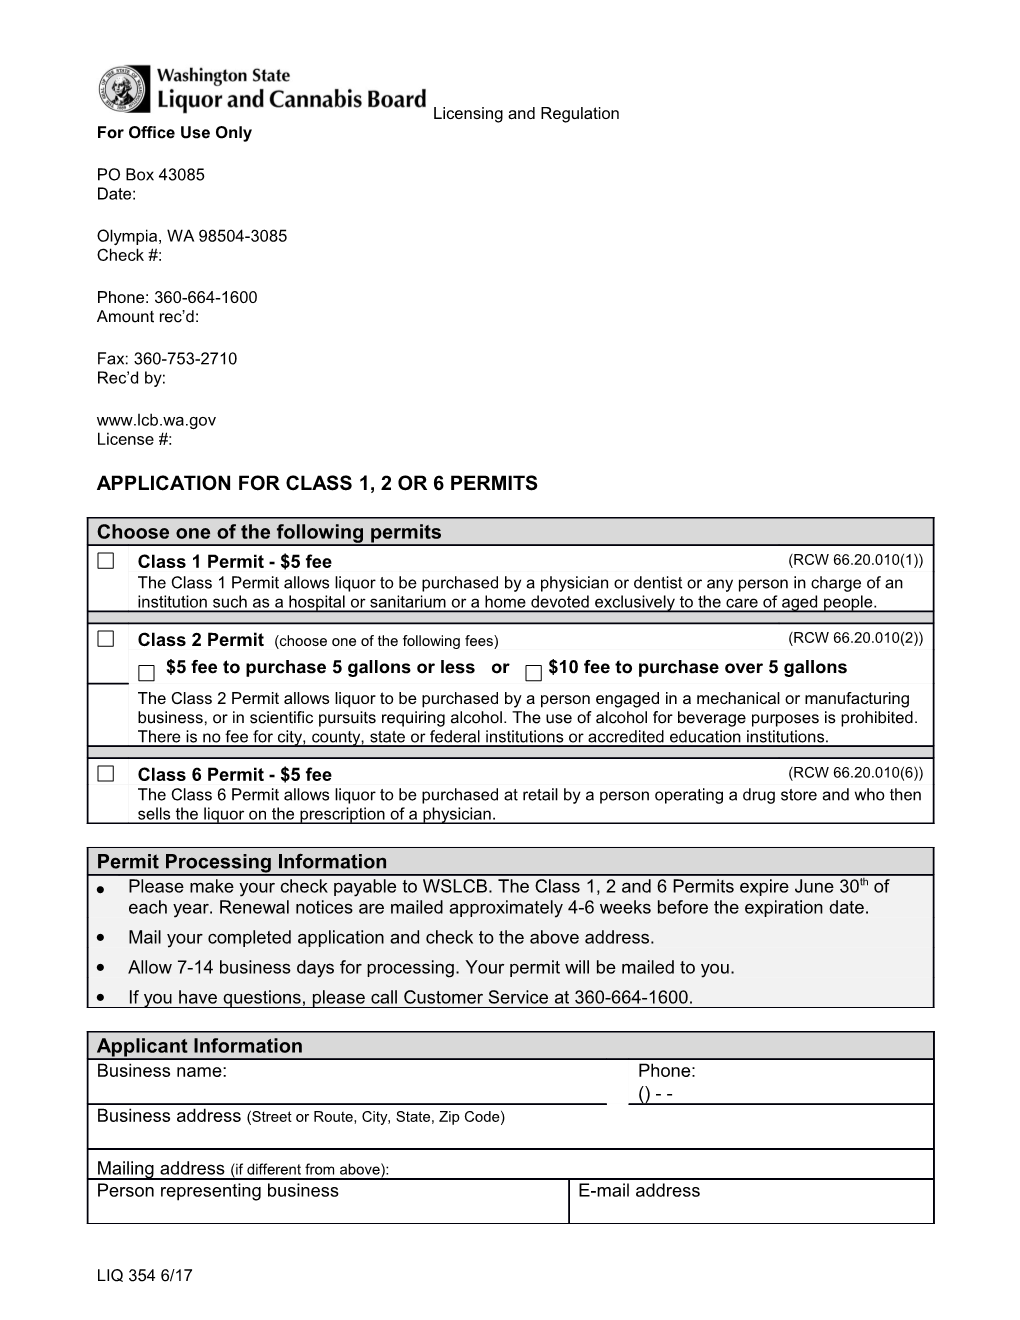 Sample Class 1 2 6 Application for Class 1 2 Or 6 Permits